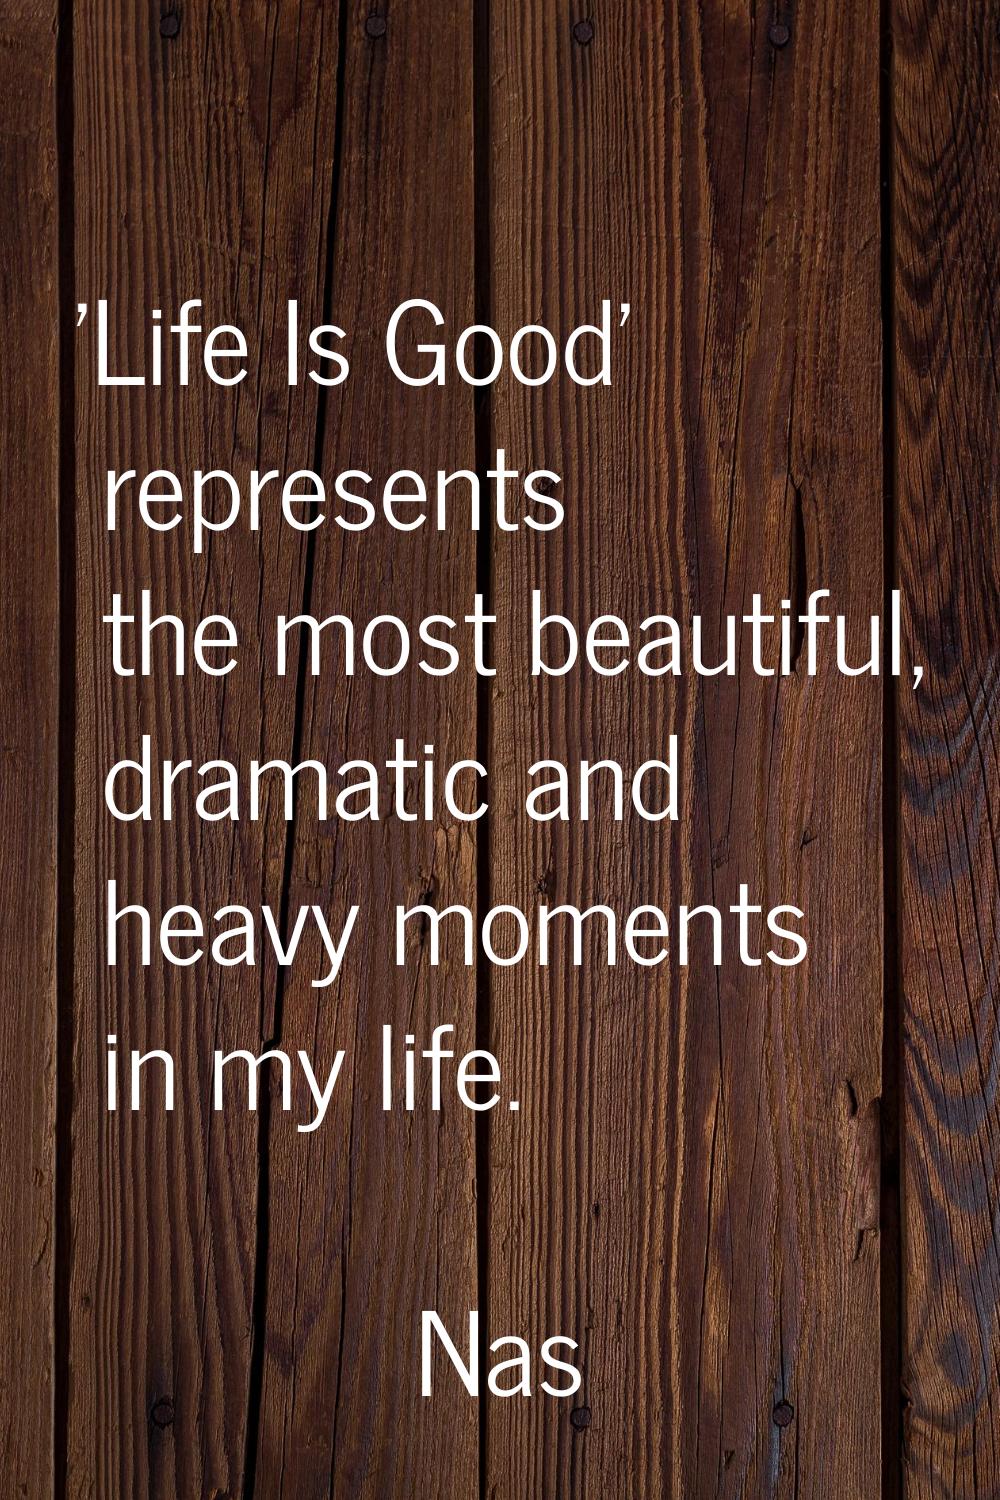 'Life Is Good' represents the most beautiful, dramatic and heavy moments in my life.